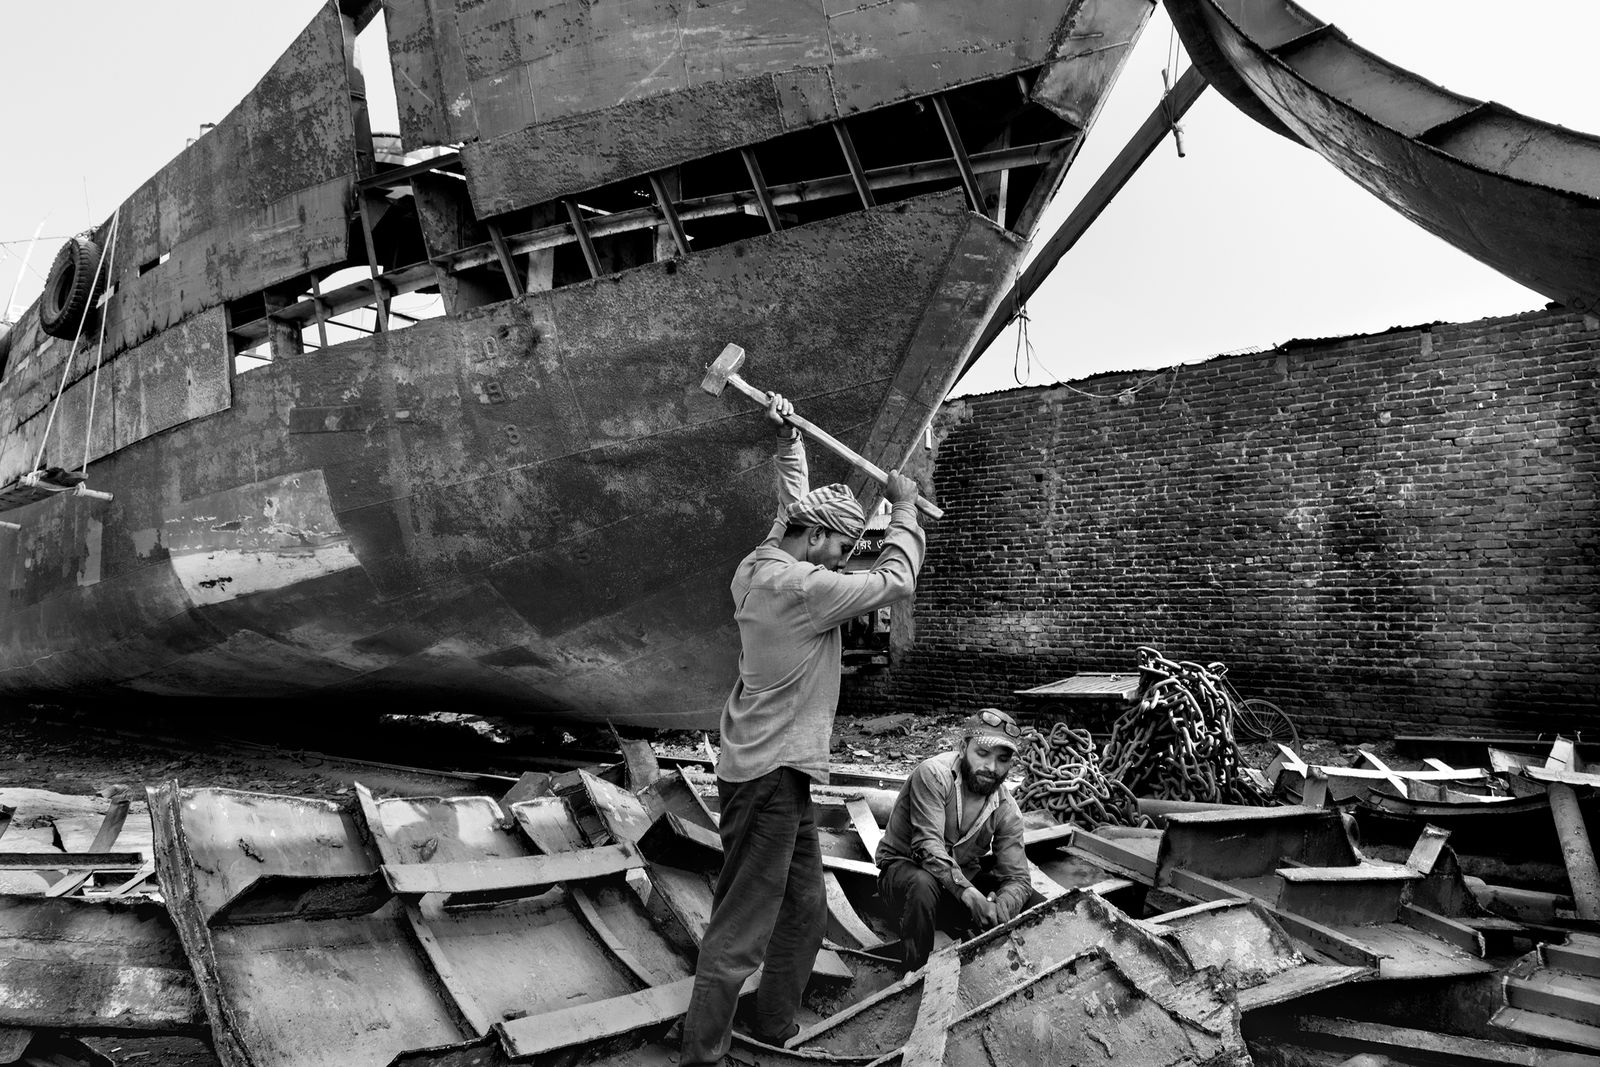 © Larry Louie - Image from the Ship Breaking - The World's Most Dangerous Job photography project